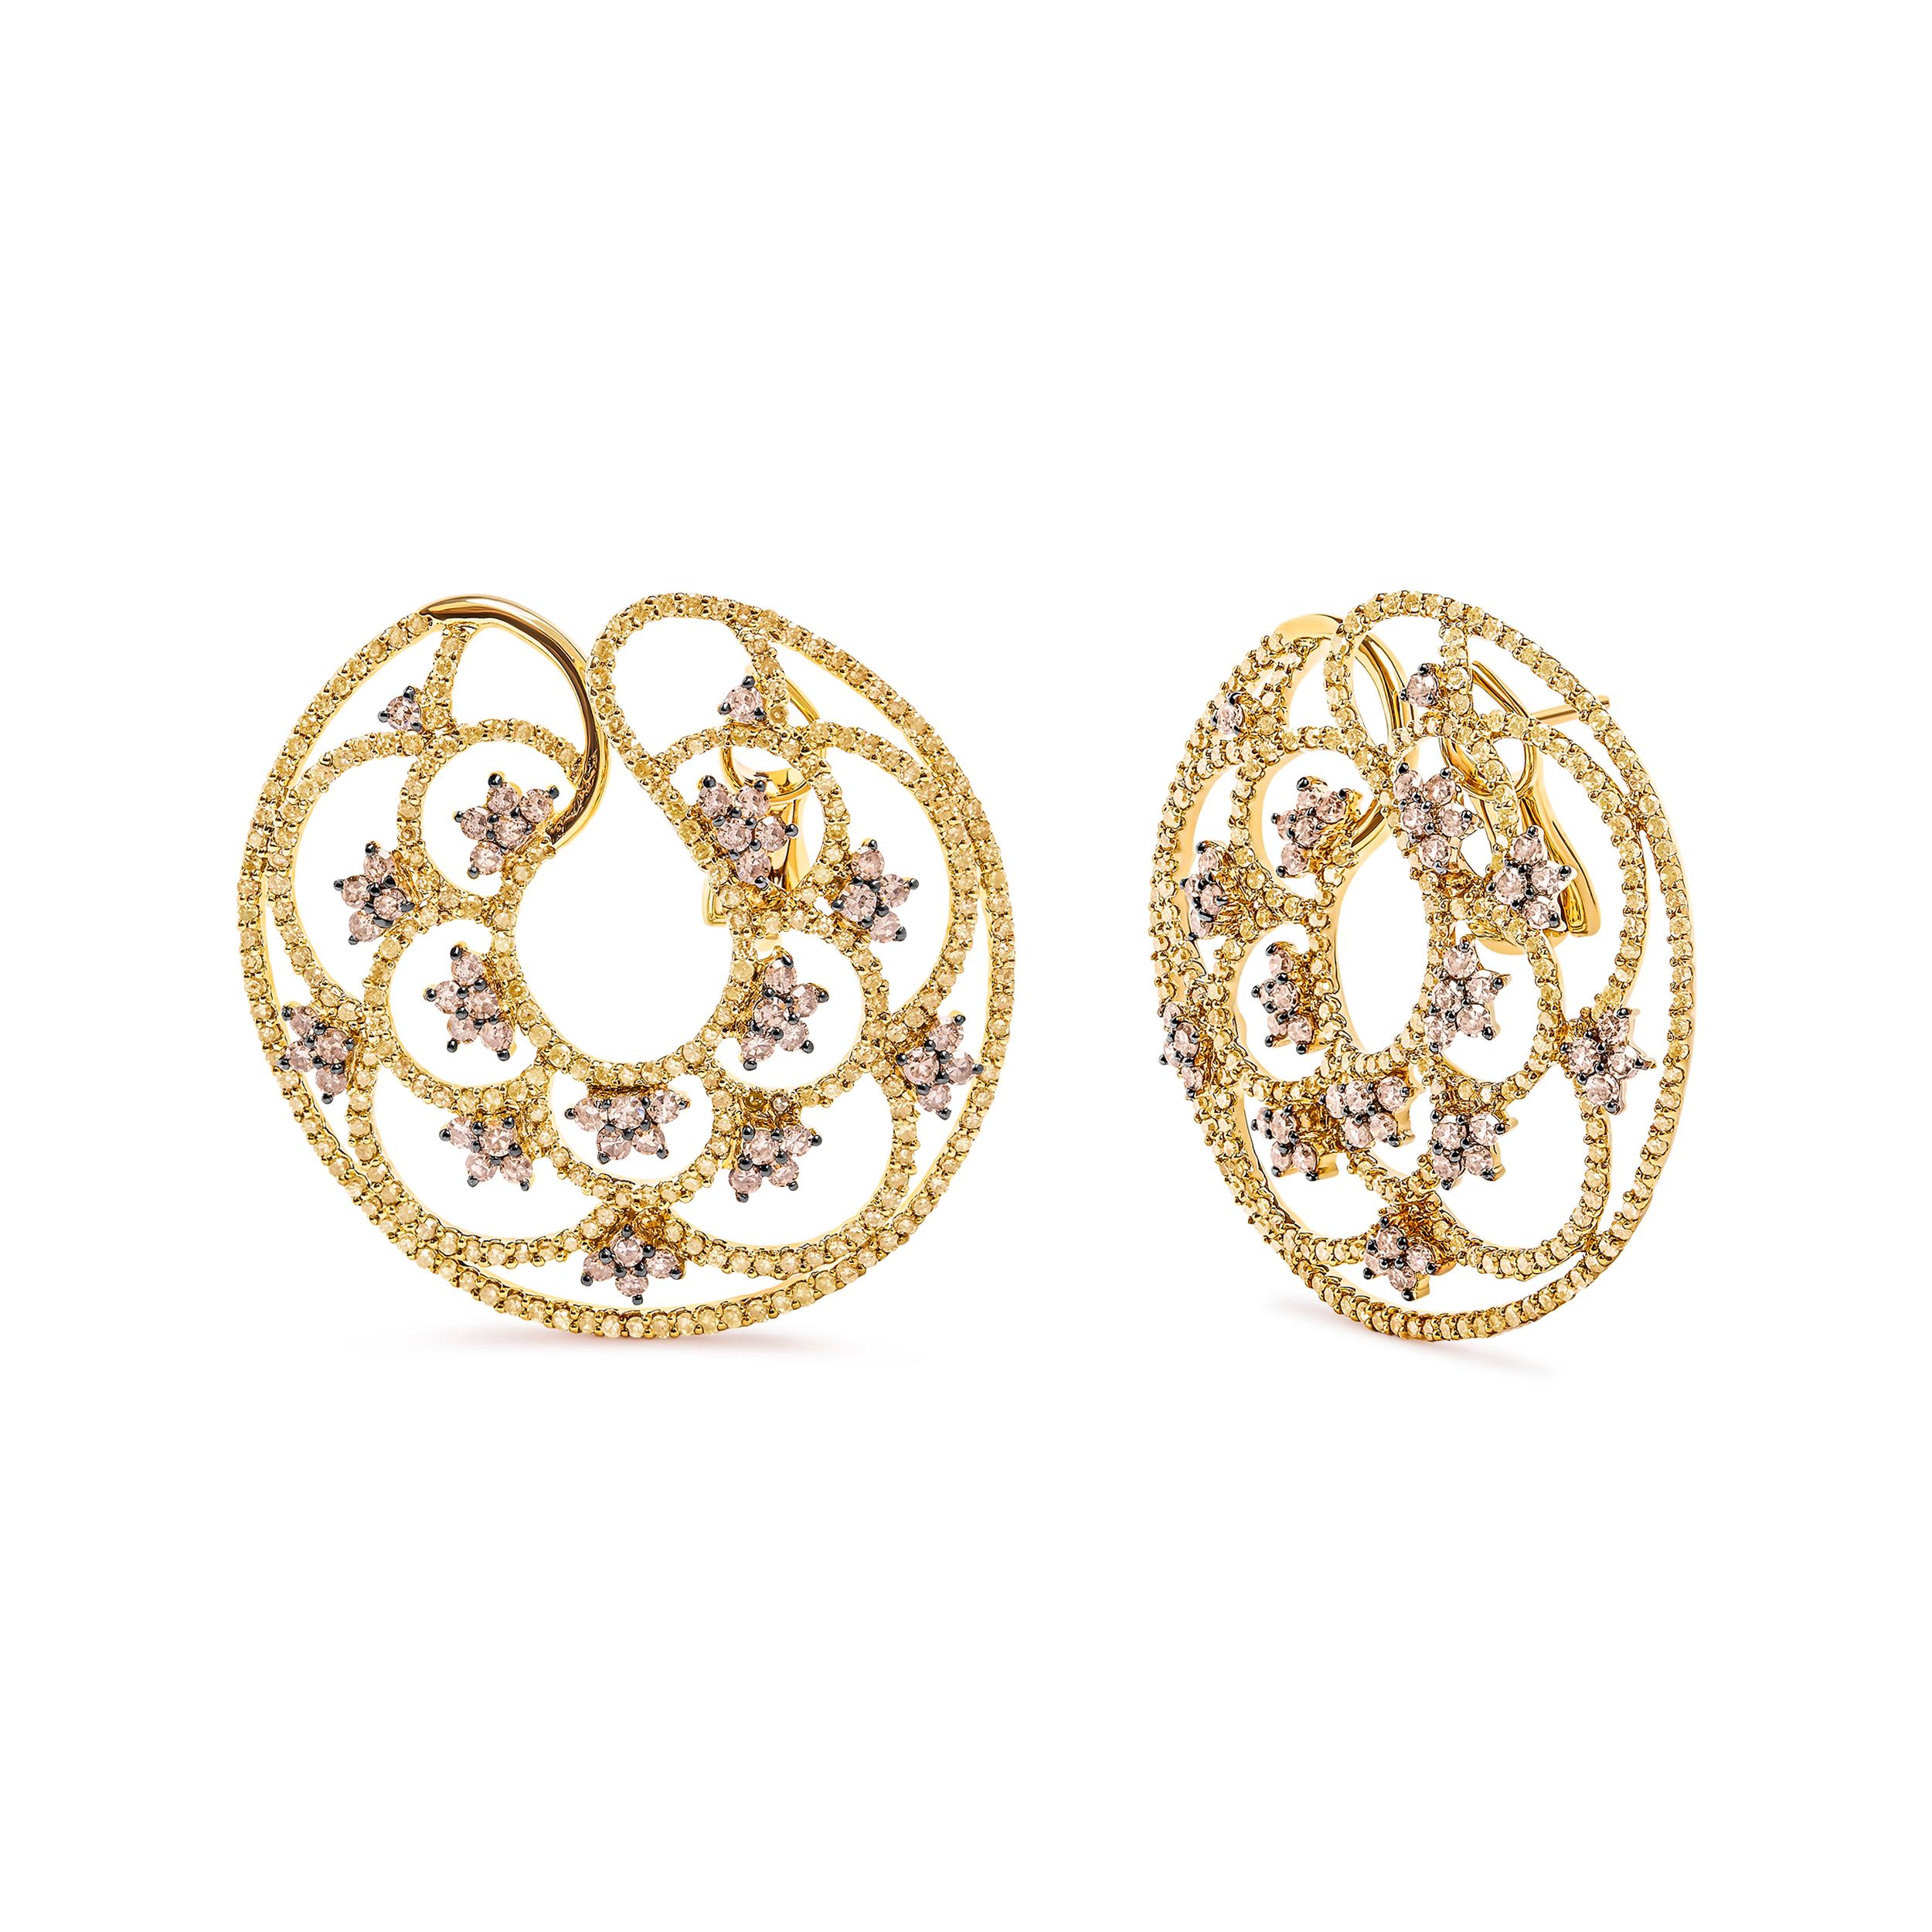 Introducing a celestial masterpiece crafted in 14K yellow gold, these breathtaking hoop earrings will transport you to a world of heavenly elegance. With a total diamond weight of 4 7/8 cttw, these stunning earrings boast 641 round diamonds,